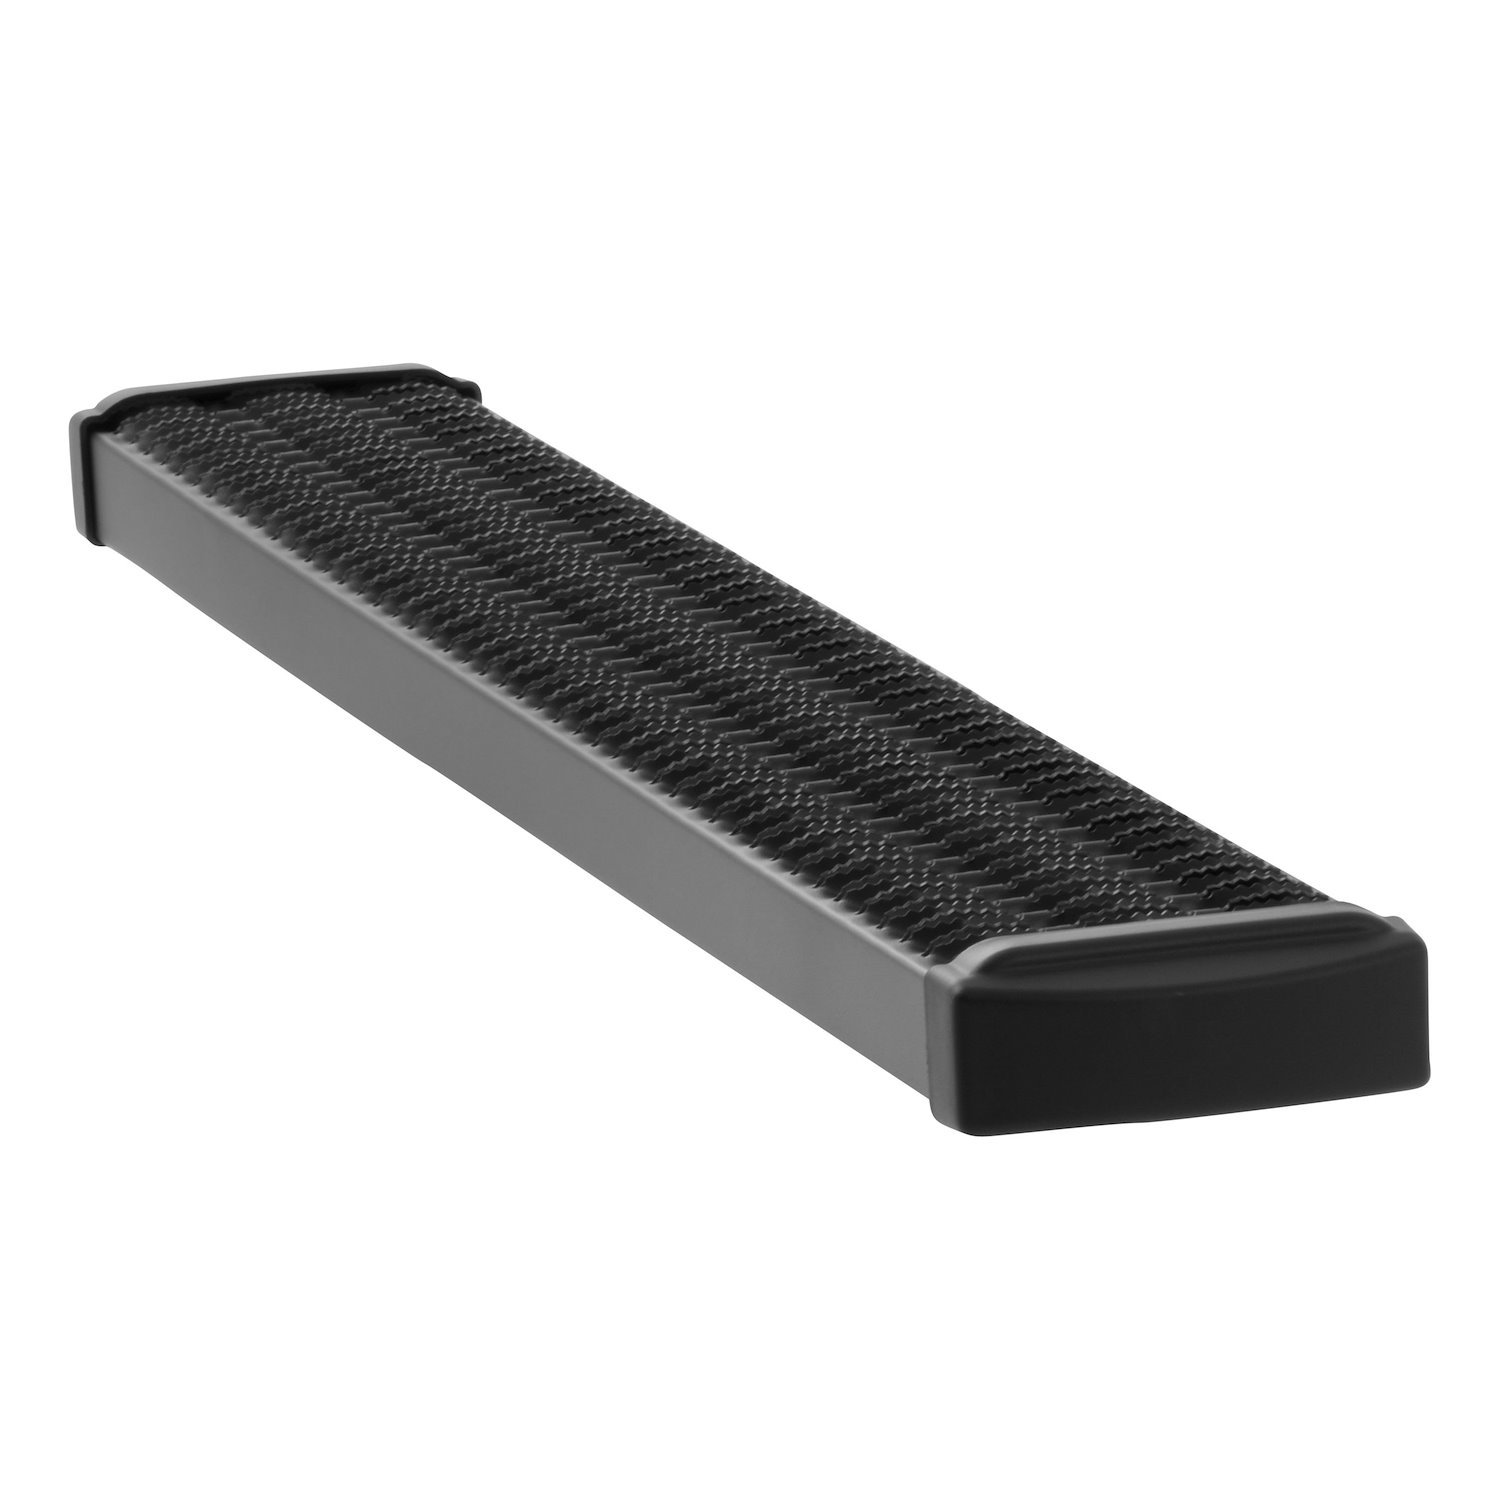 415254-401727 Grip Step 7 in. x 54 in. Black Passenger-Side Running Board Fits Select Ford Transit, E-Transit